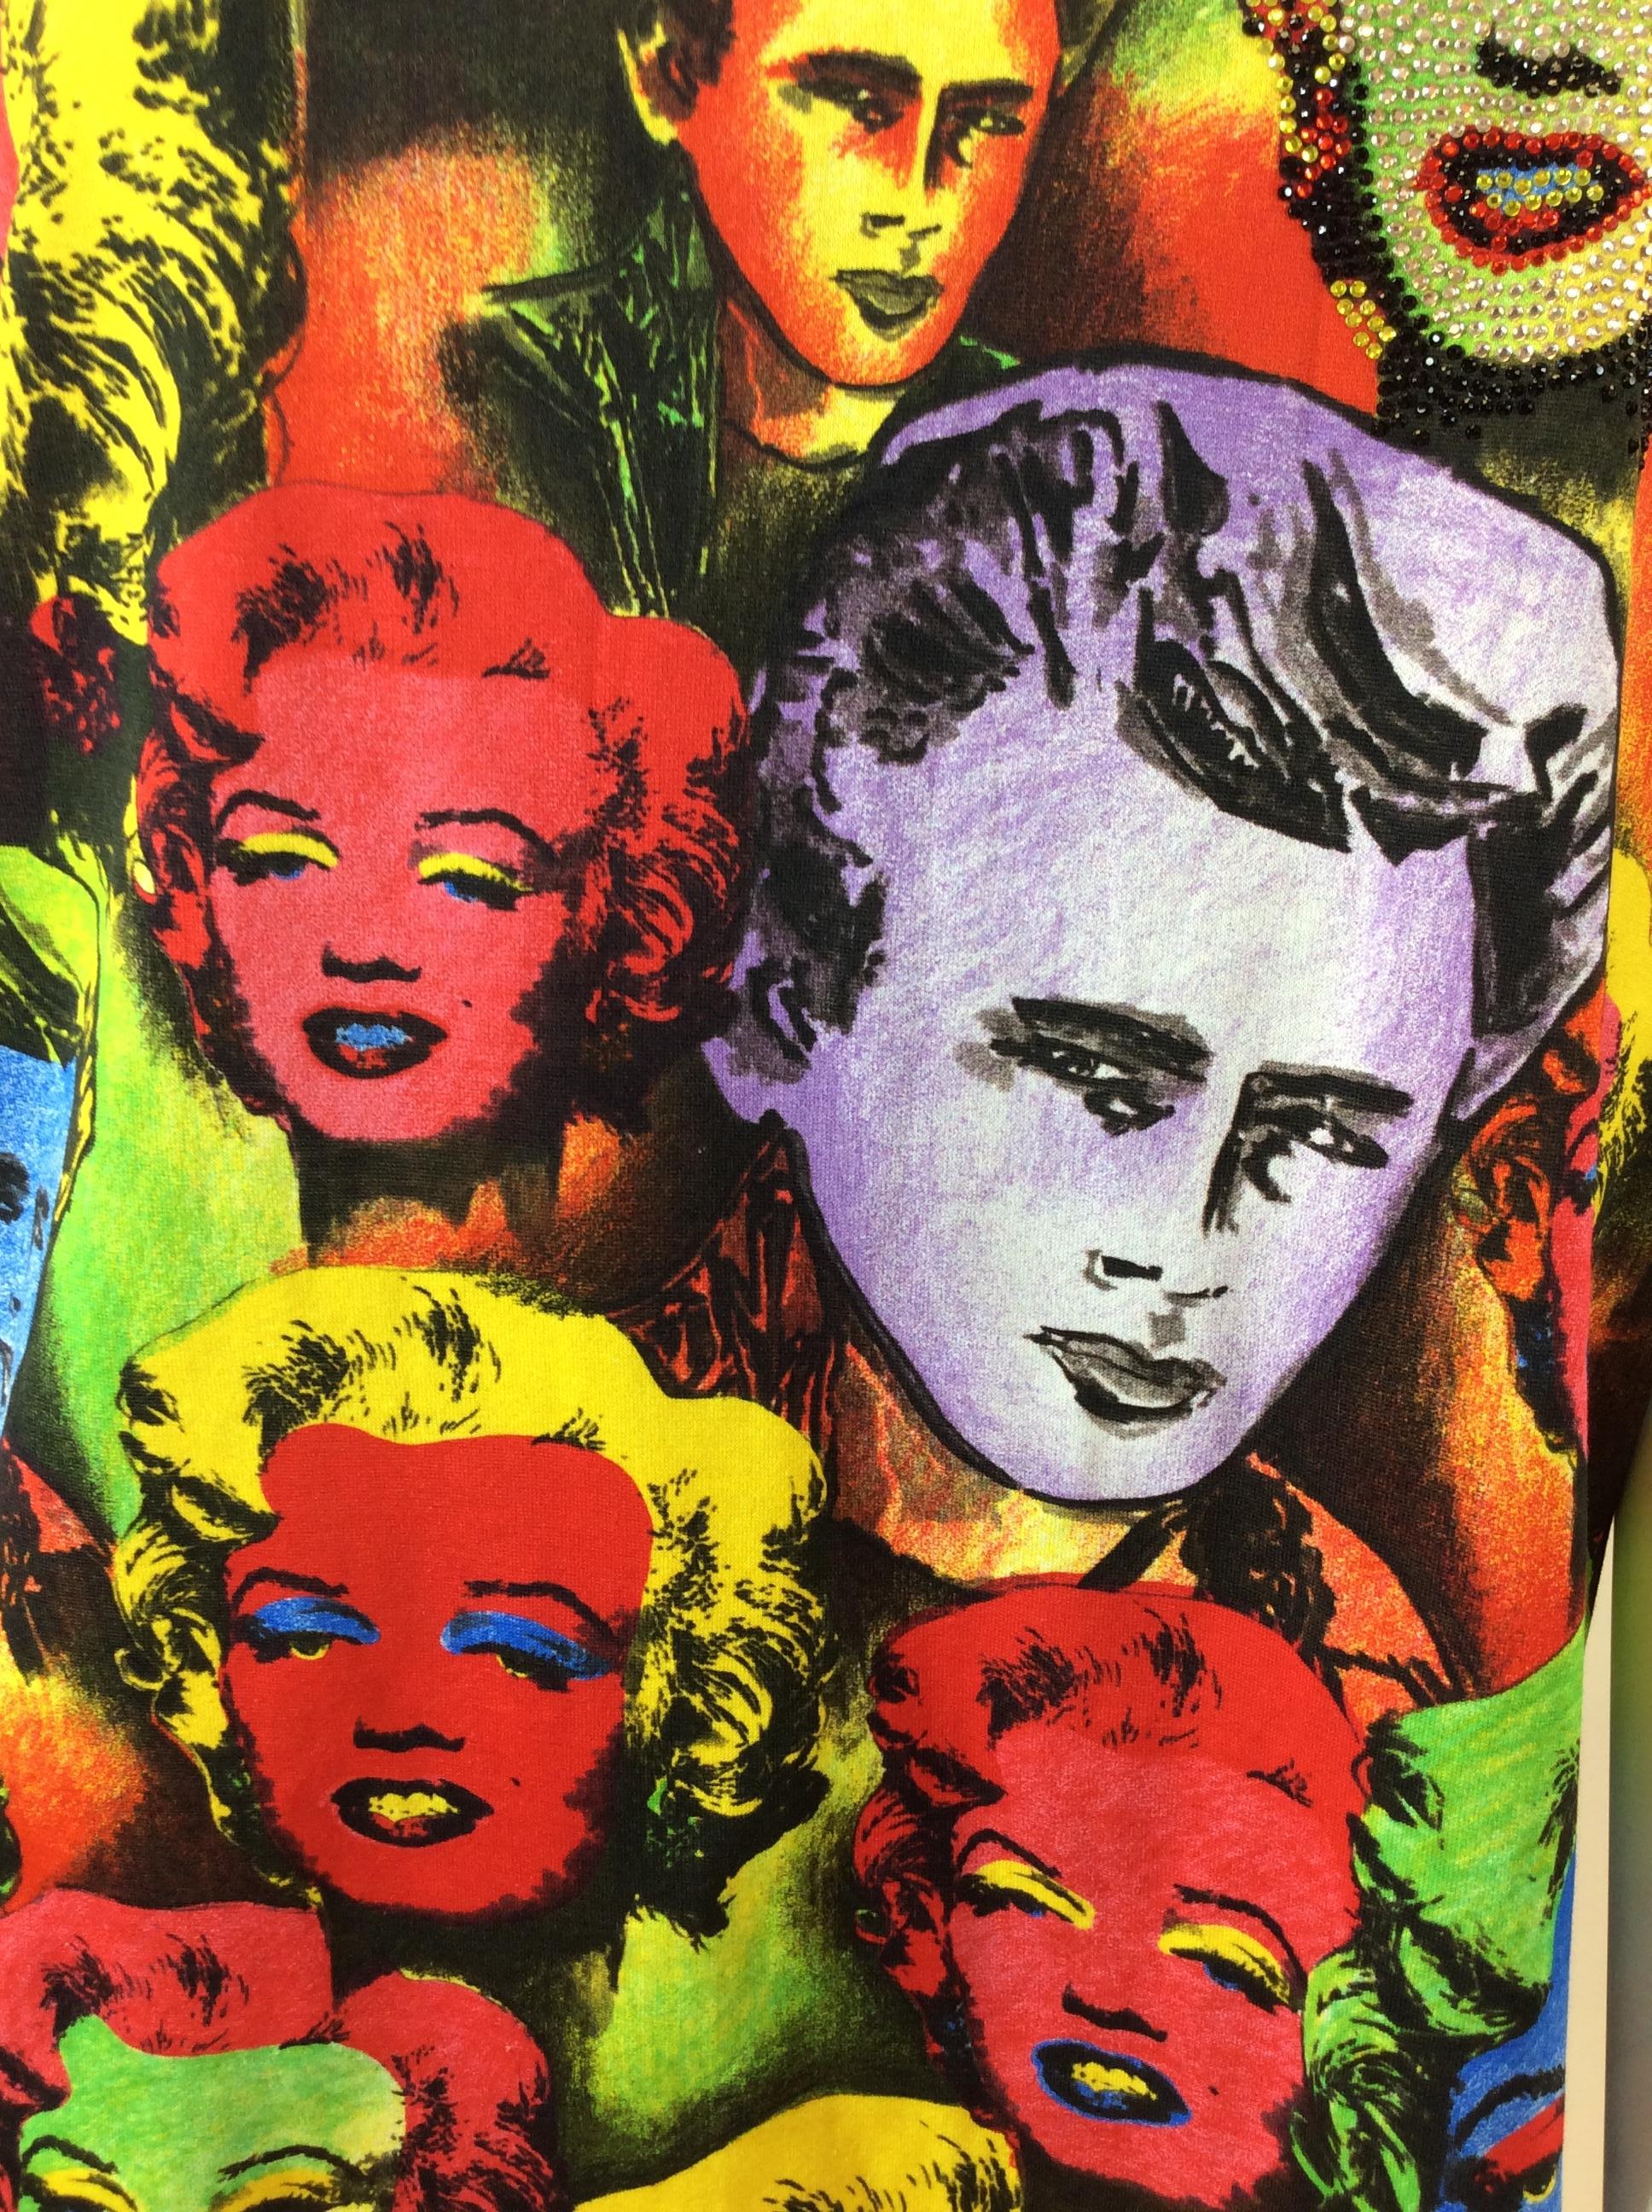 Versace Limited Edition Andy Warhol Tribute Shirt 1